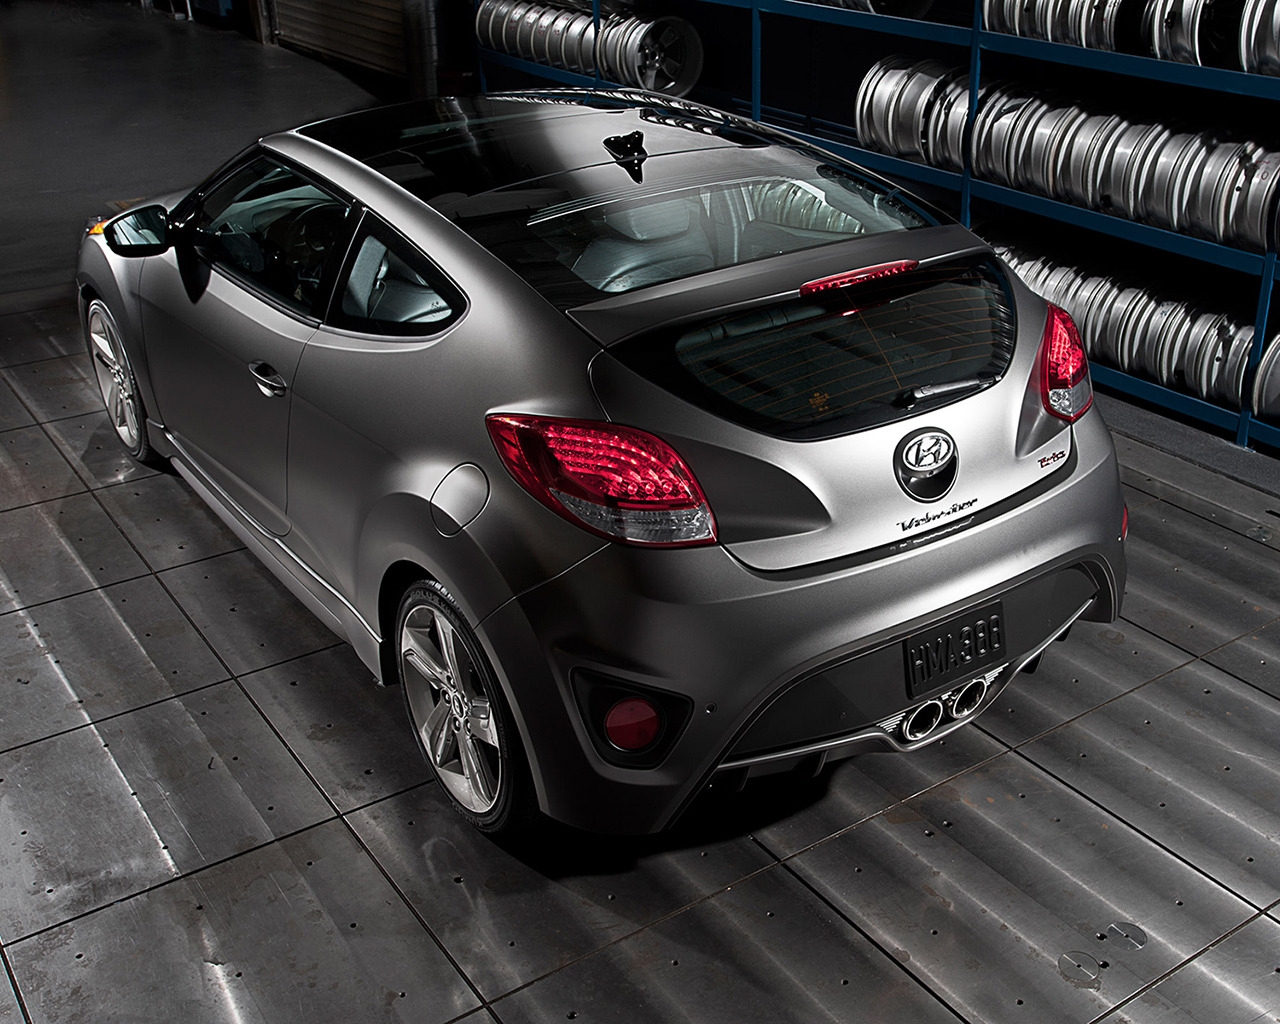 Hyundai Veloster Turbo 2013 Edition for 1280 x 1024 resolution